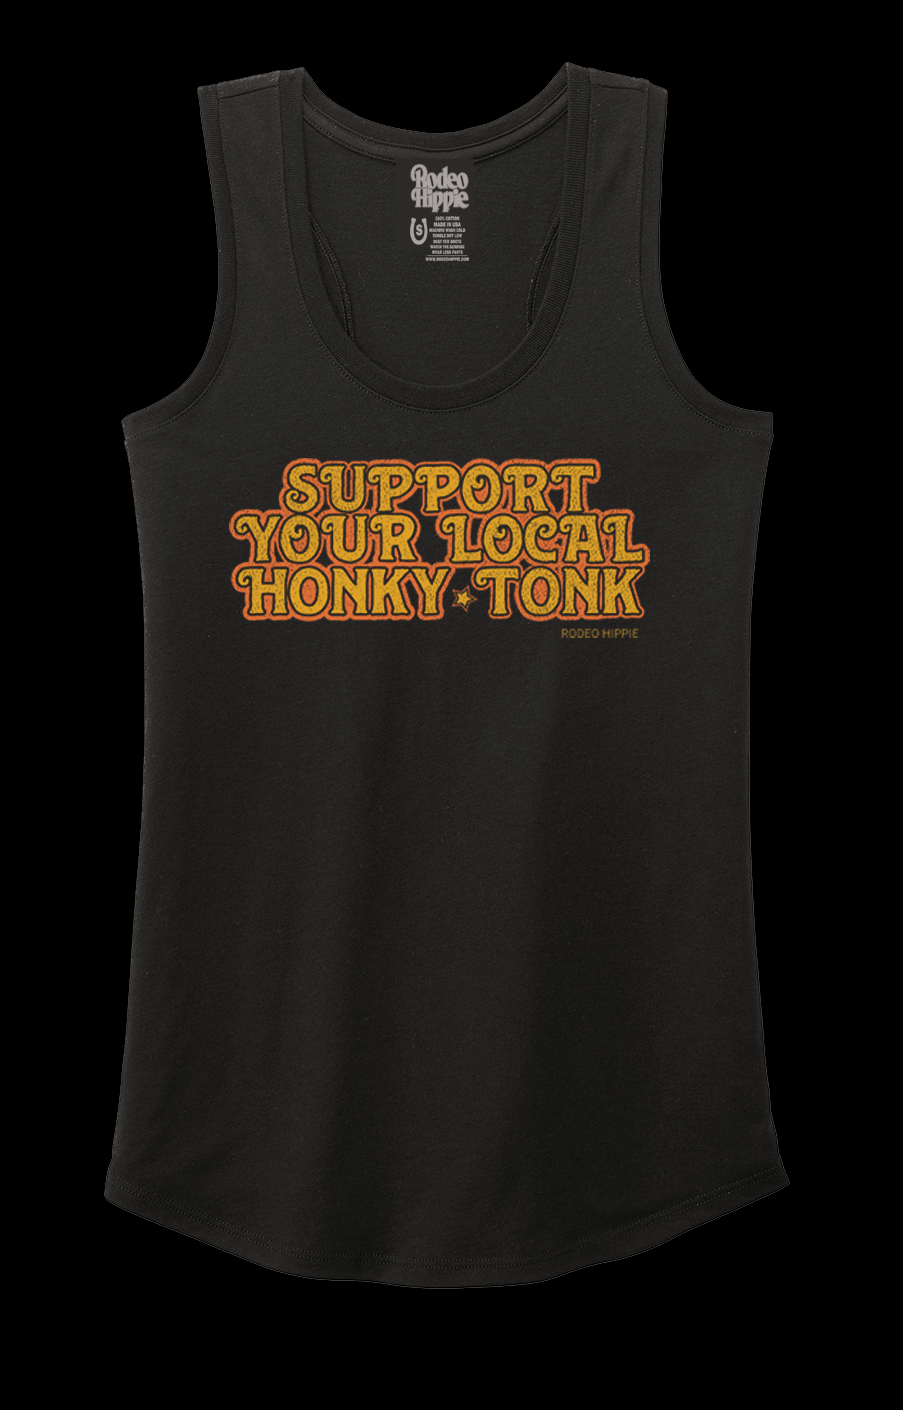 Support Your Local Honky Tonk Black Graphic MUSCLE TANK Top (made 2 order) RH